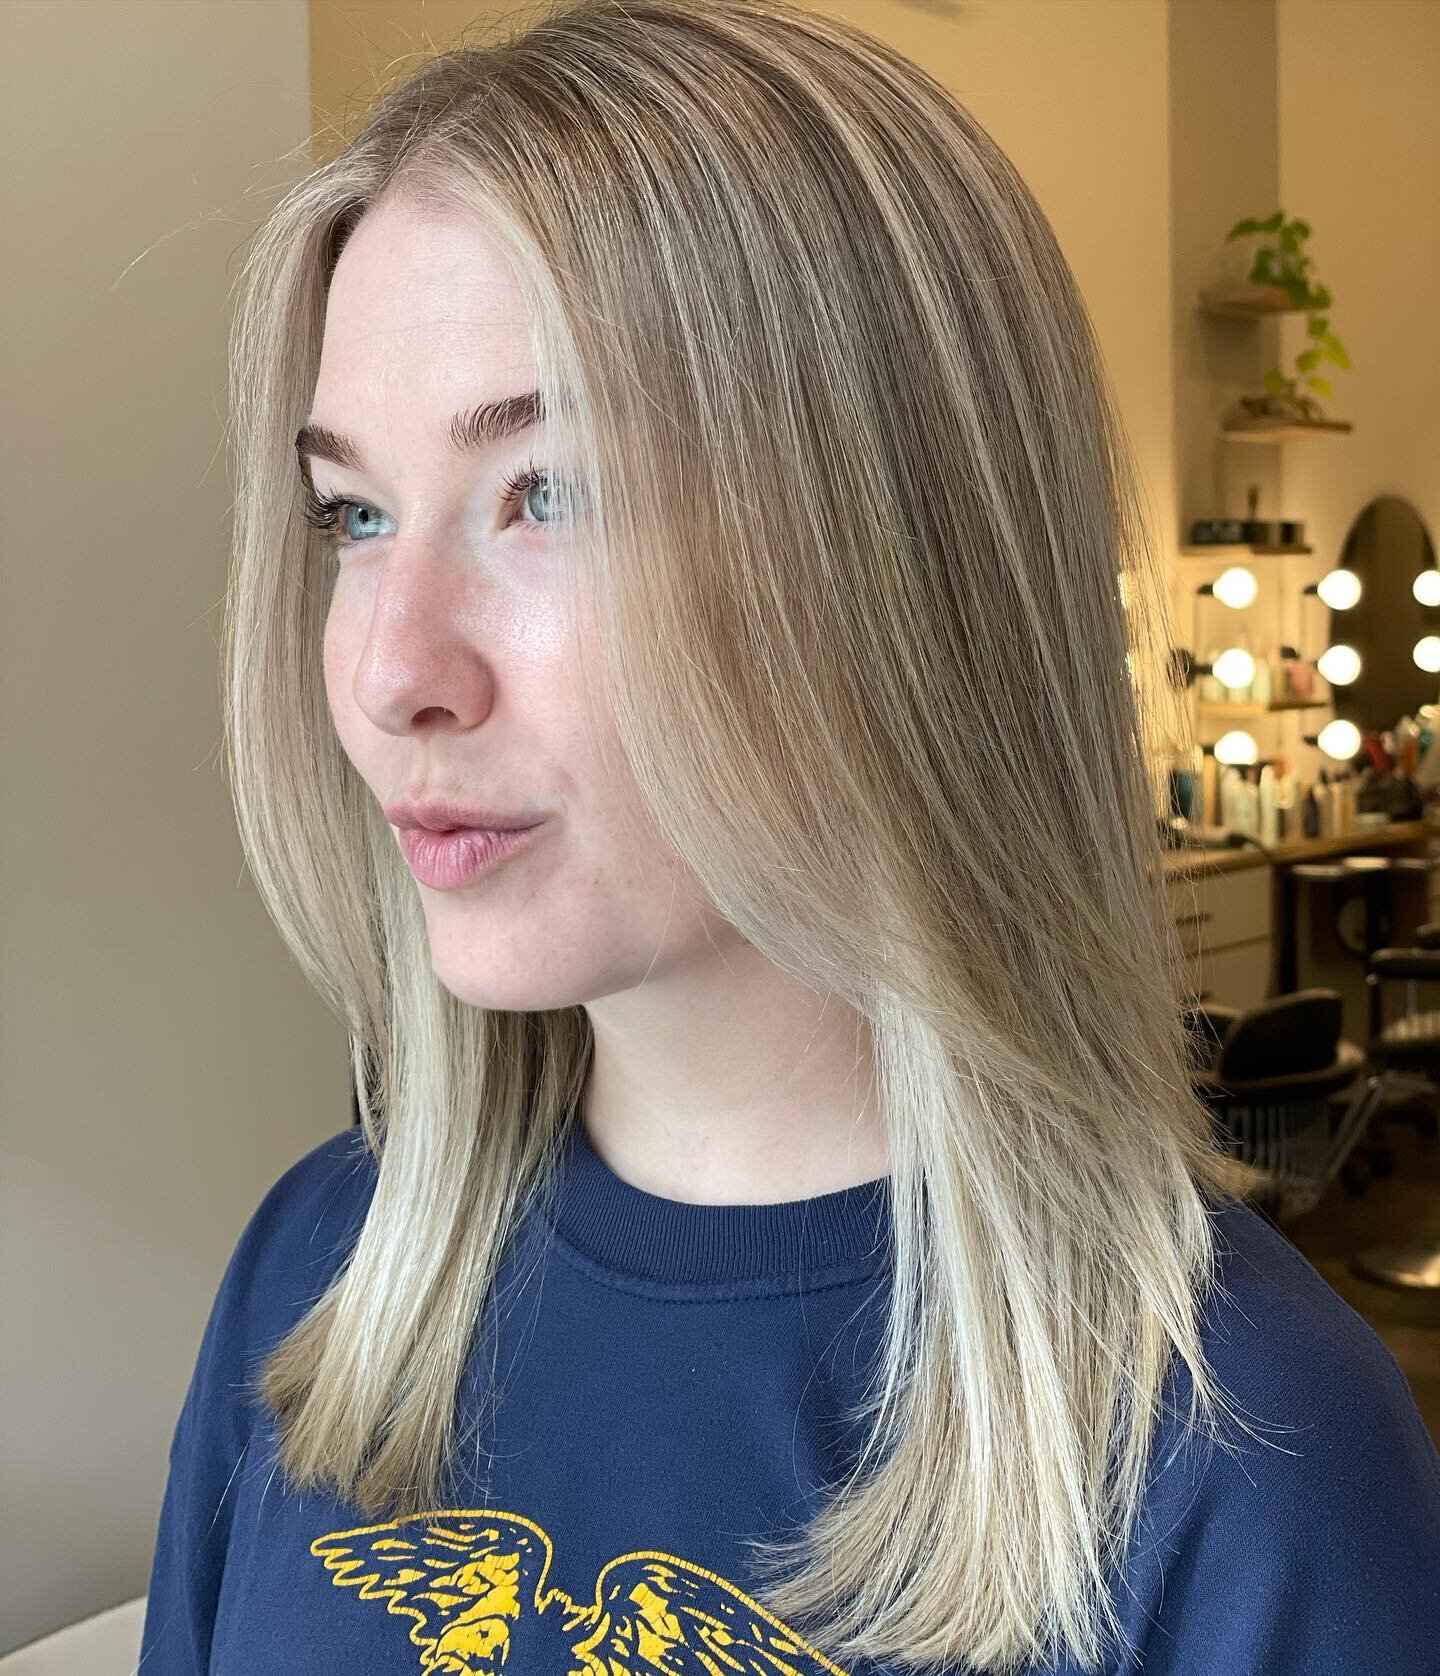 Keeping it dimensional during our refresh so she doesn&rsquo;t become a solid blonde. We like ribbons and depth over here 🦋💕

#chicagosalon #chicagohairstylist #blondehair